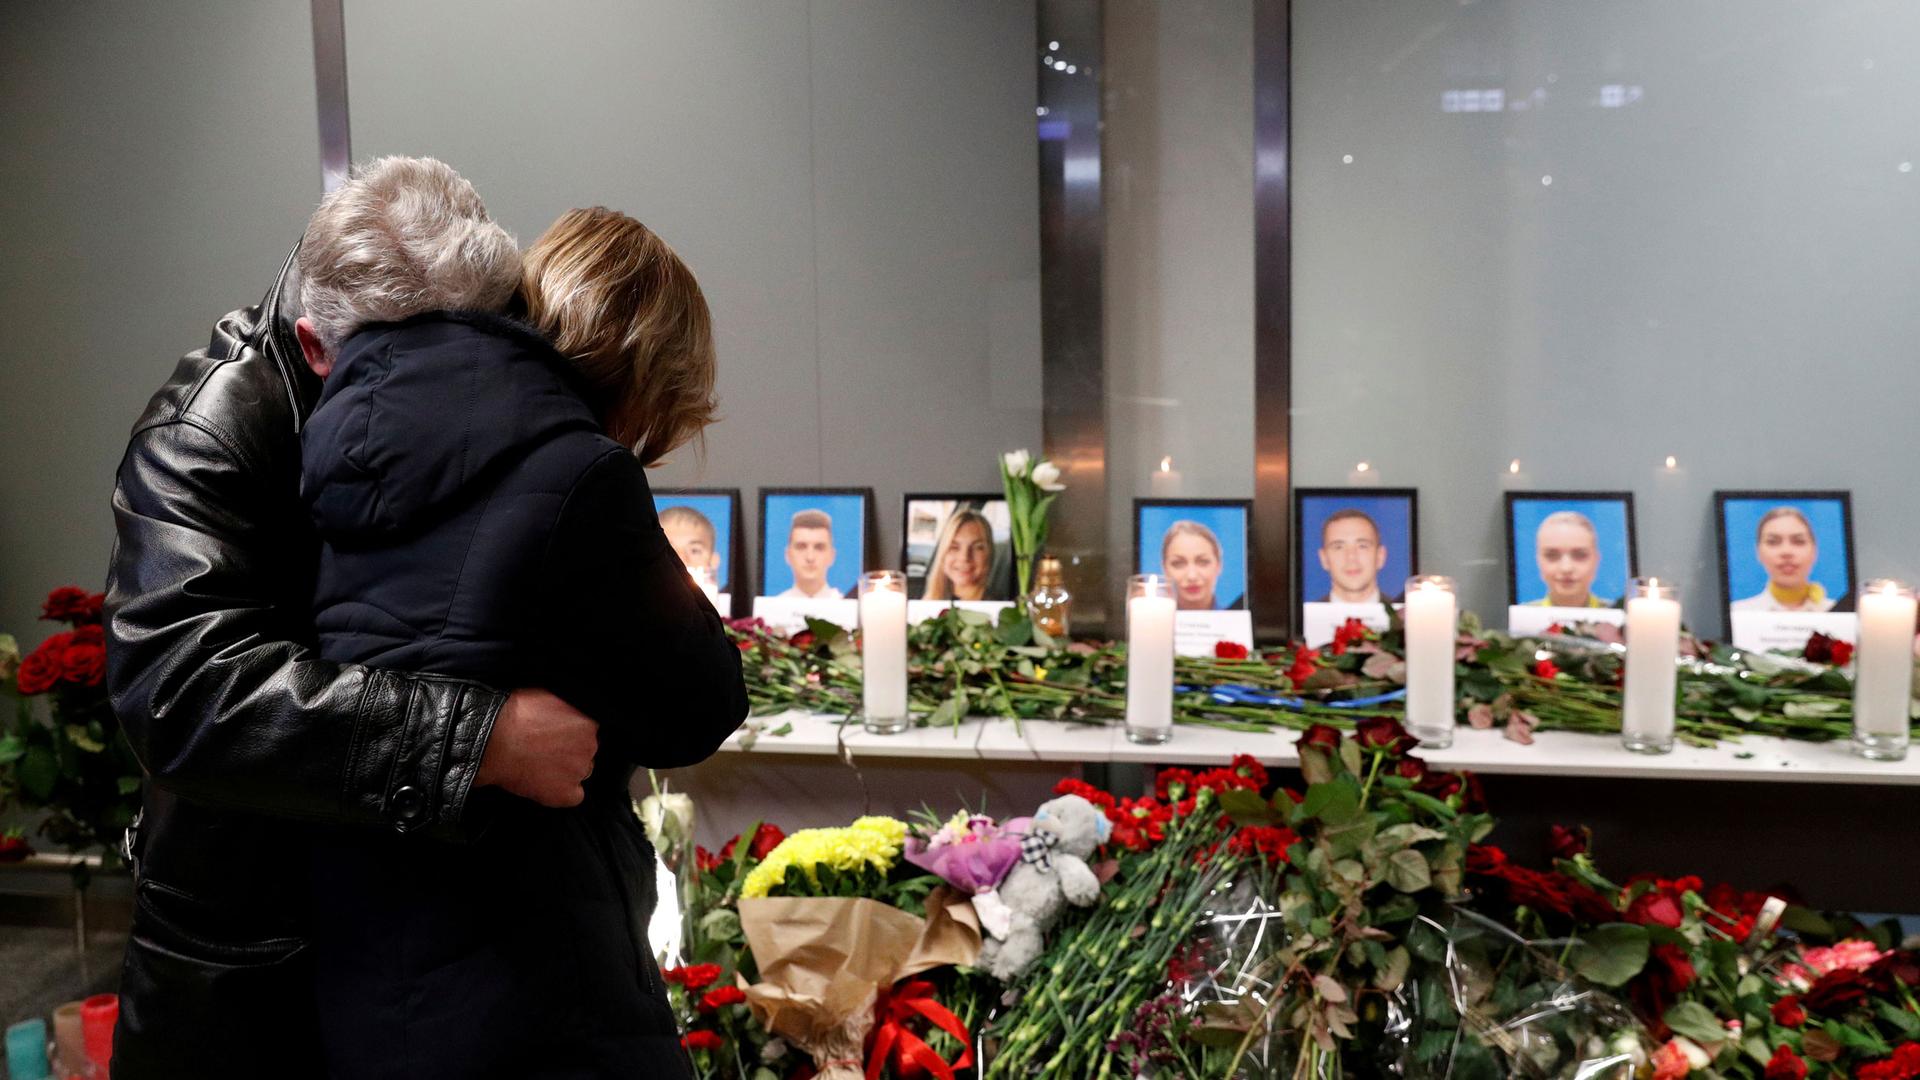 Two people are shown hugging while standing in front of a makeshift memorial for Ukraine Airlines flight that crashed.